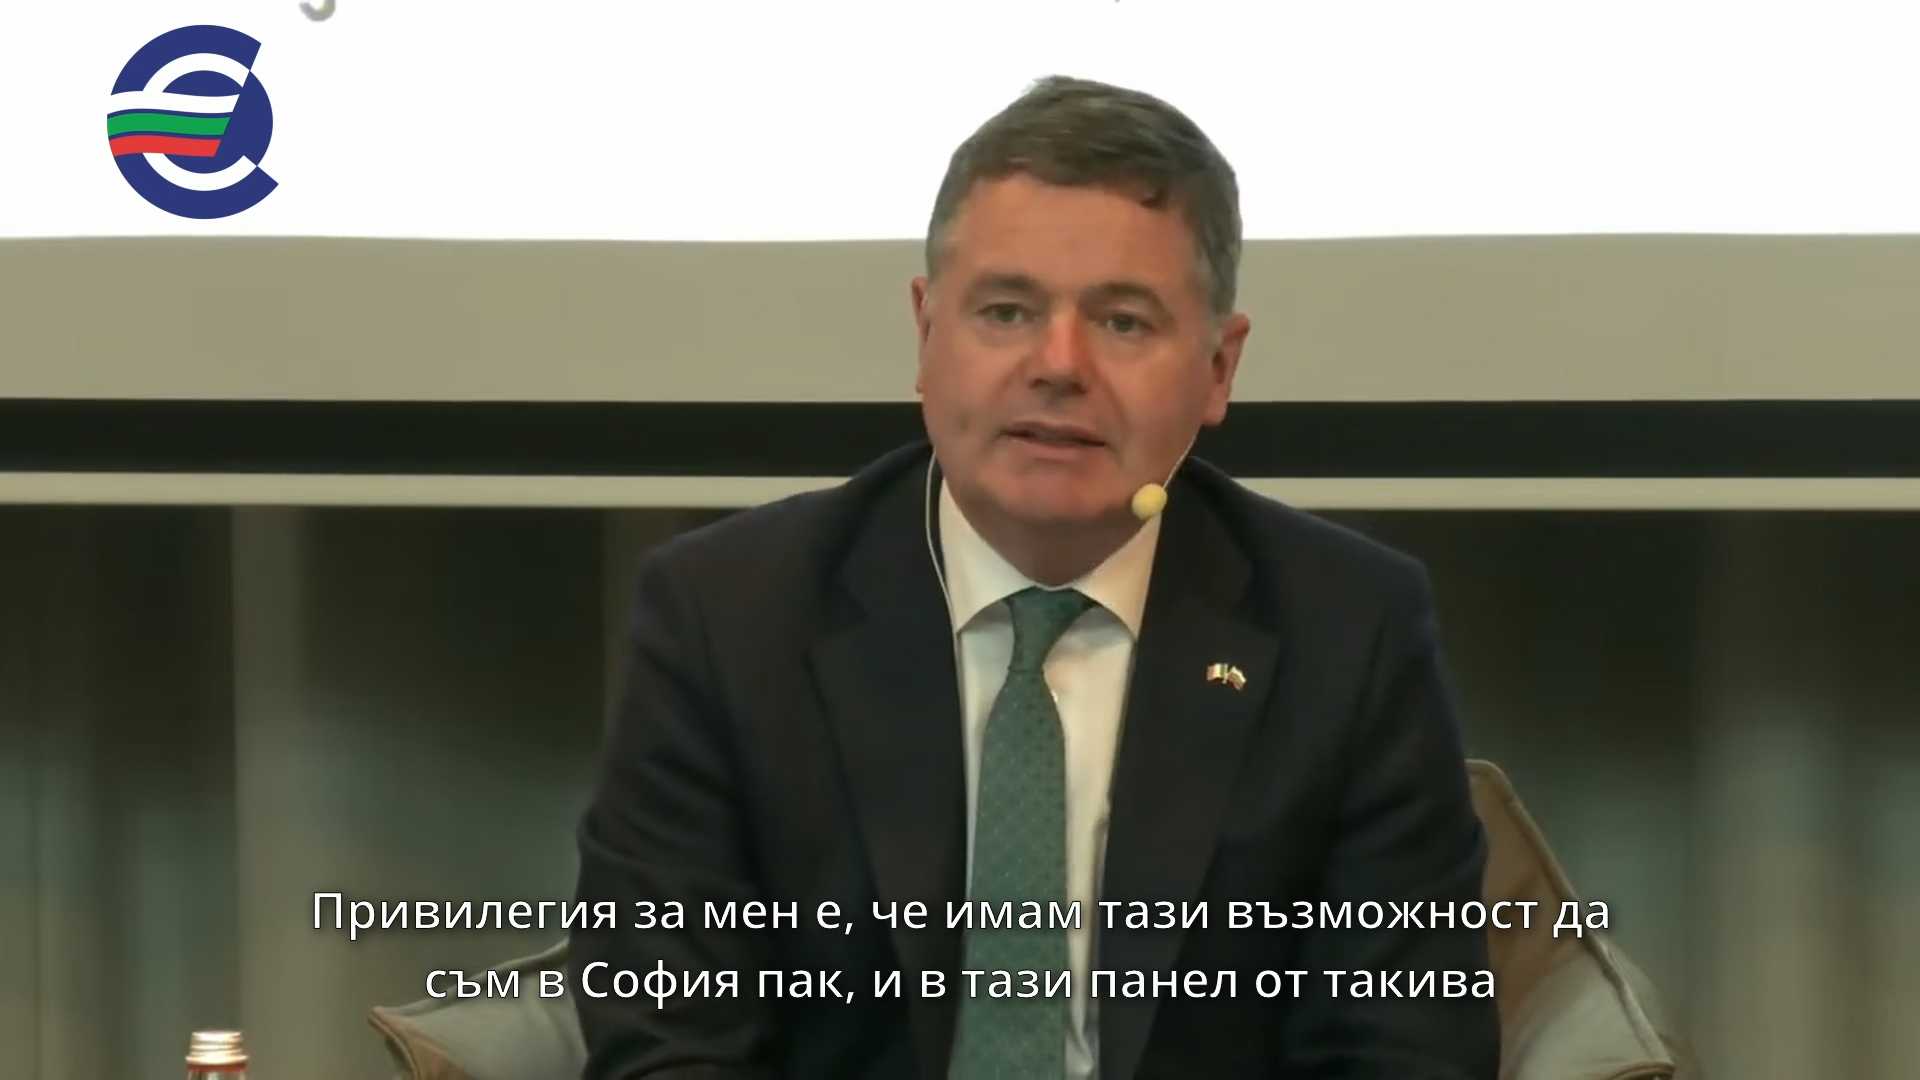 Paschal Donohoe, President of the Eurogroup, at the conference "Bulgaria's European path - joining the euro area: advantages and challenges for business"